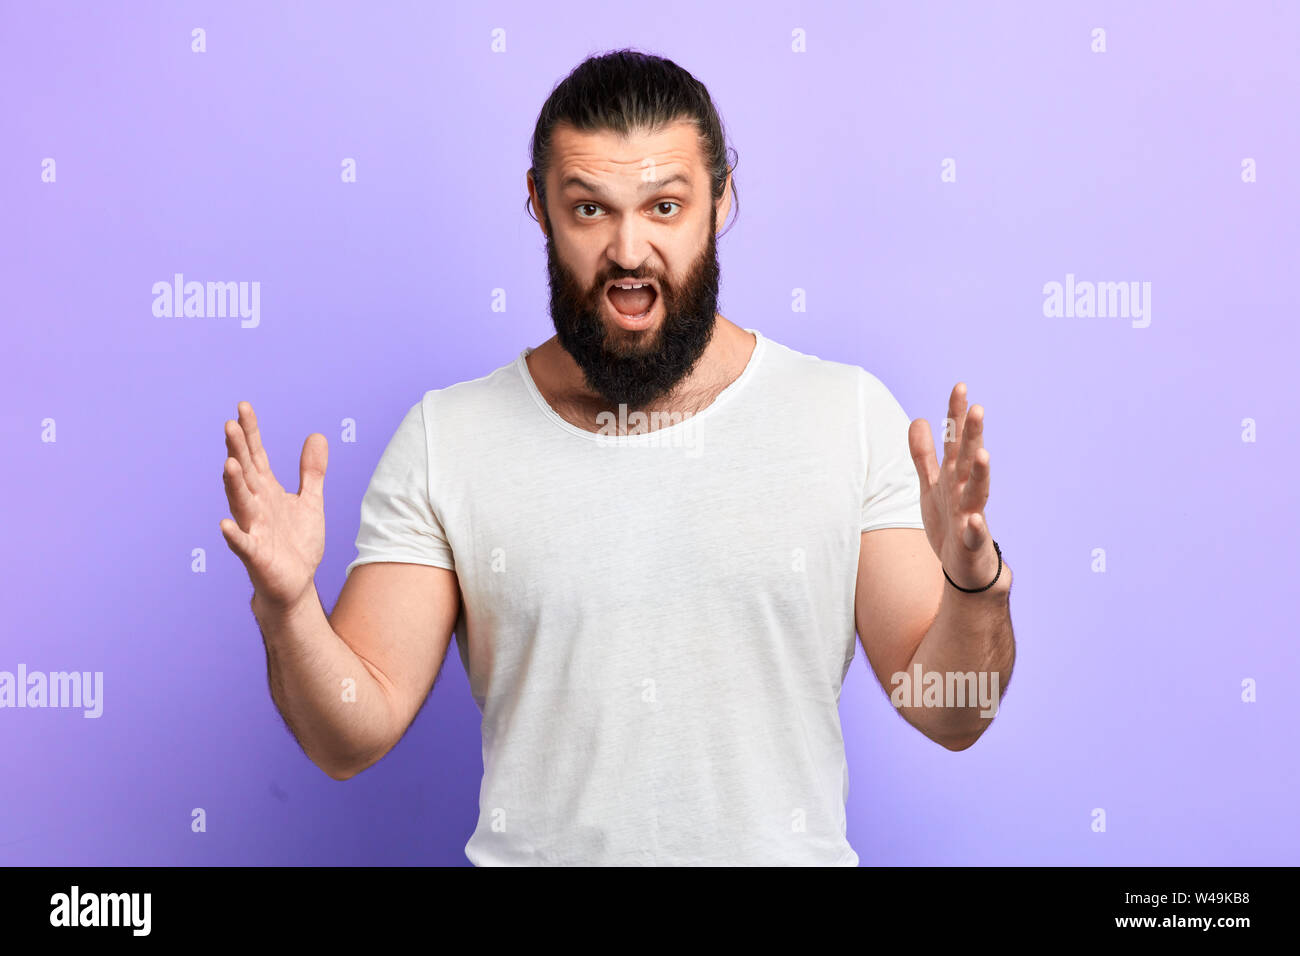 angry nervous frustrated man with hand raised open mouth shouting at somebody, isolated on blue background. Negative emotion, facial expression feelin Stock Photo